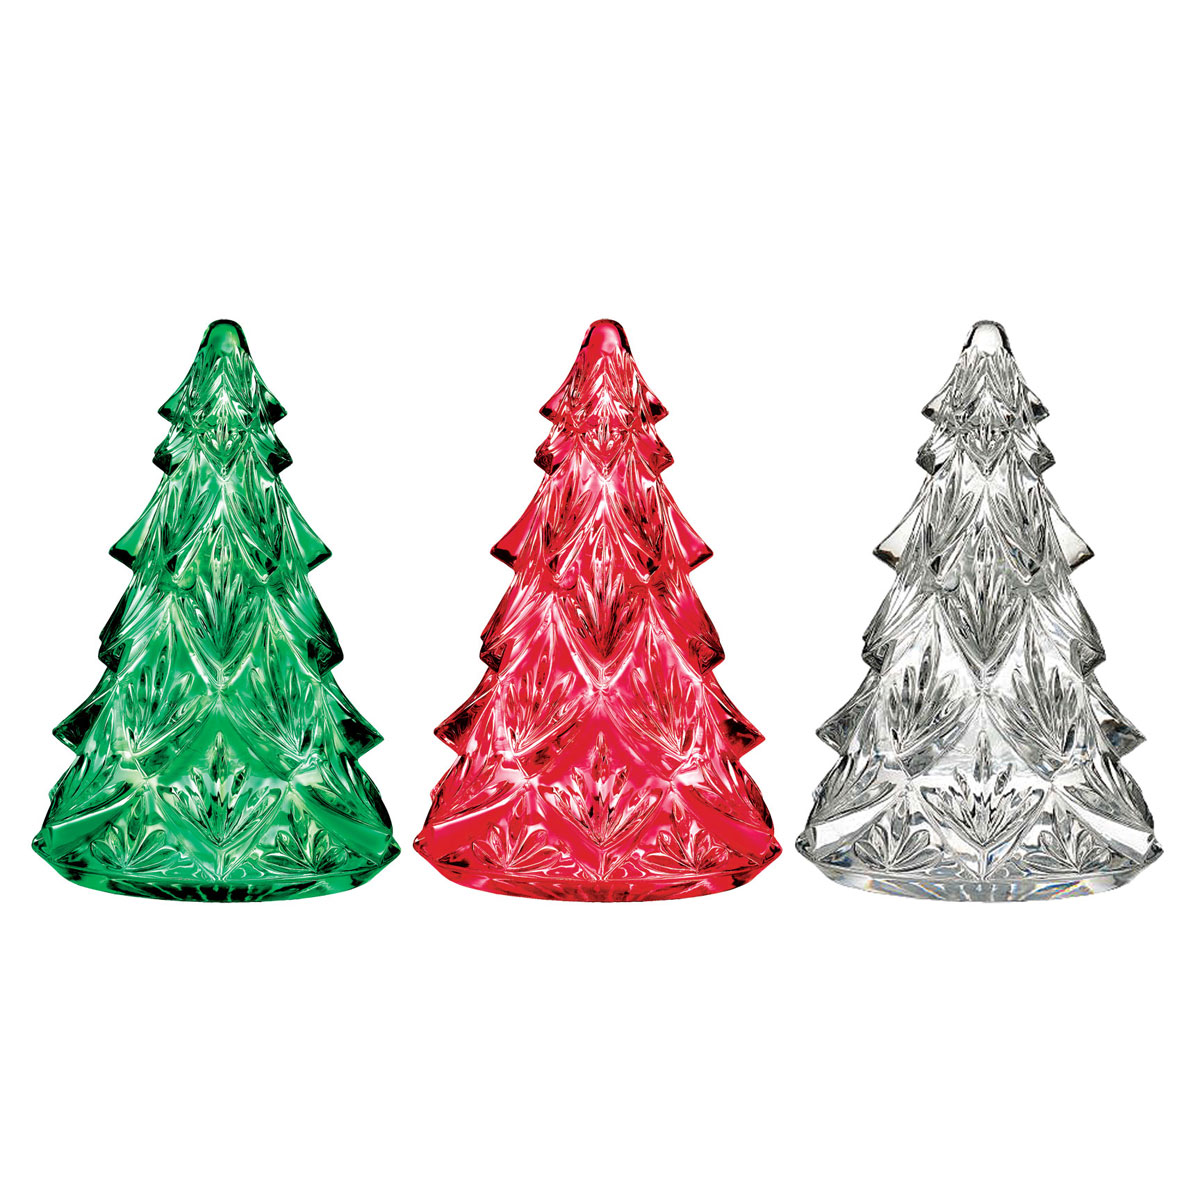 Waterford Crystal Mini Christmas Trees Set - Clear, Green and Red